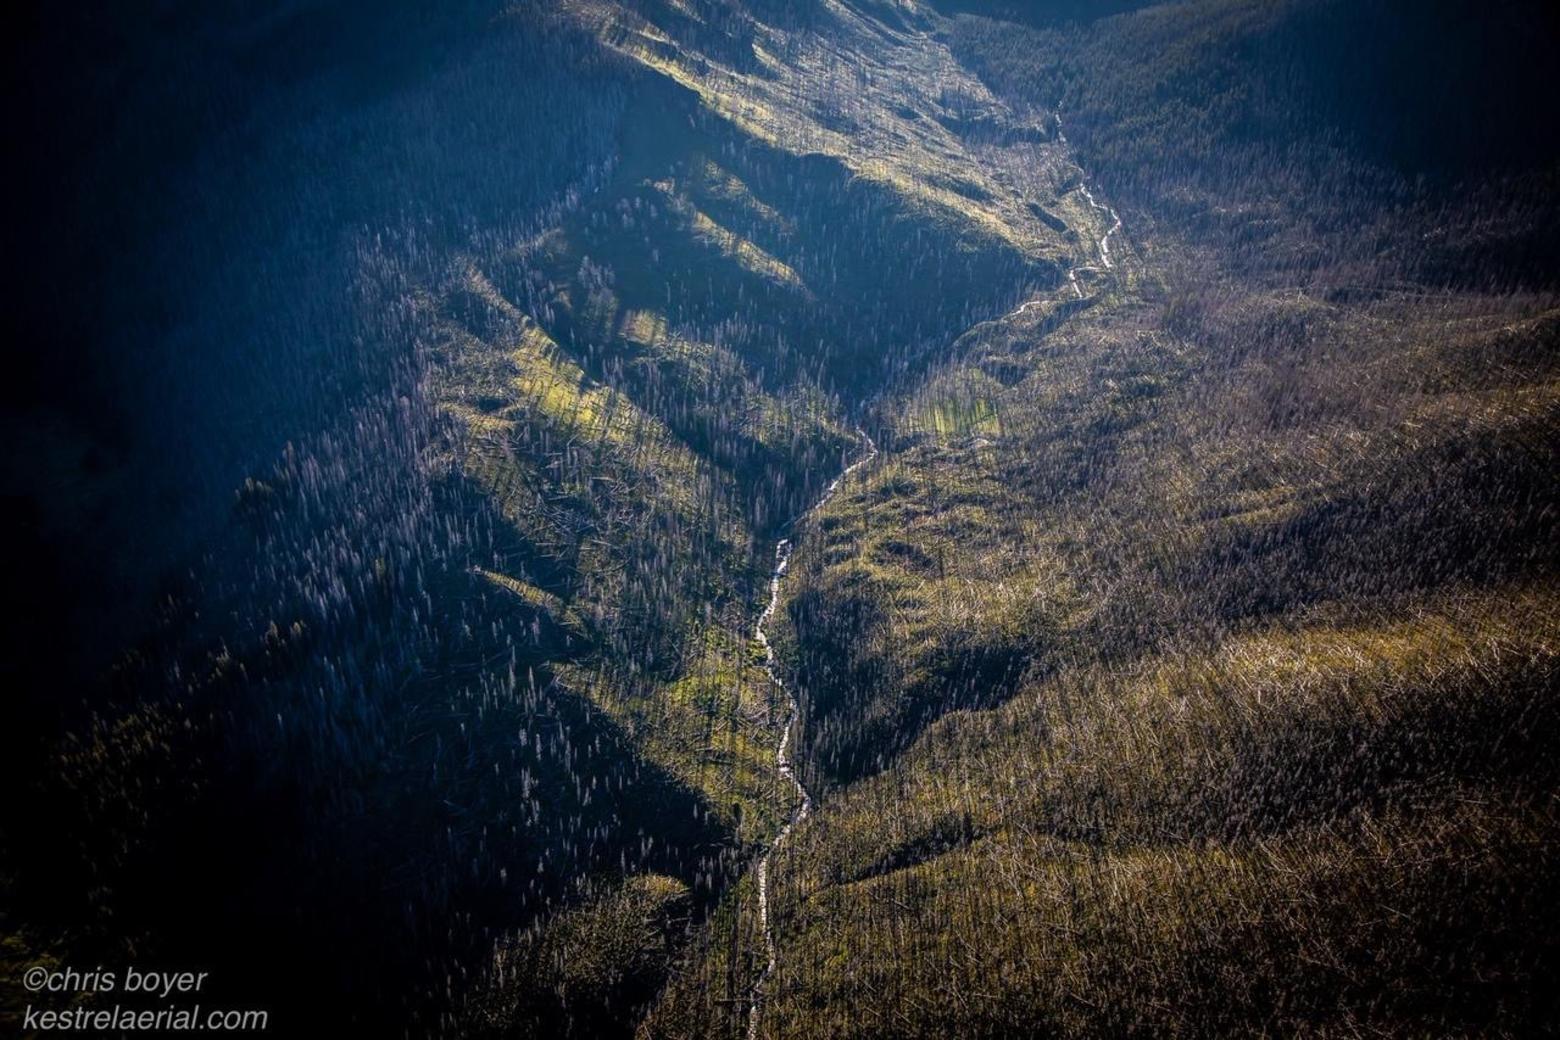 A tributary of Specimen Creek in the Gallatins reveals the ruggedness of the range in the northwest corner of Yellowstone as the mountains enter Montana. Photo courtesy Chris Boyer (kestrelaerial.com)